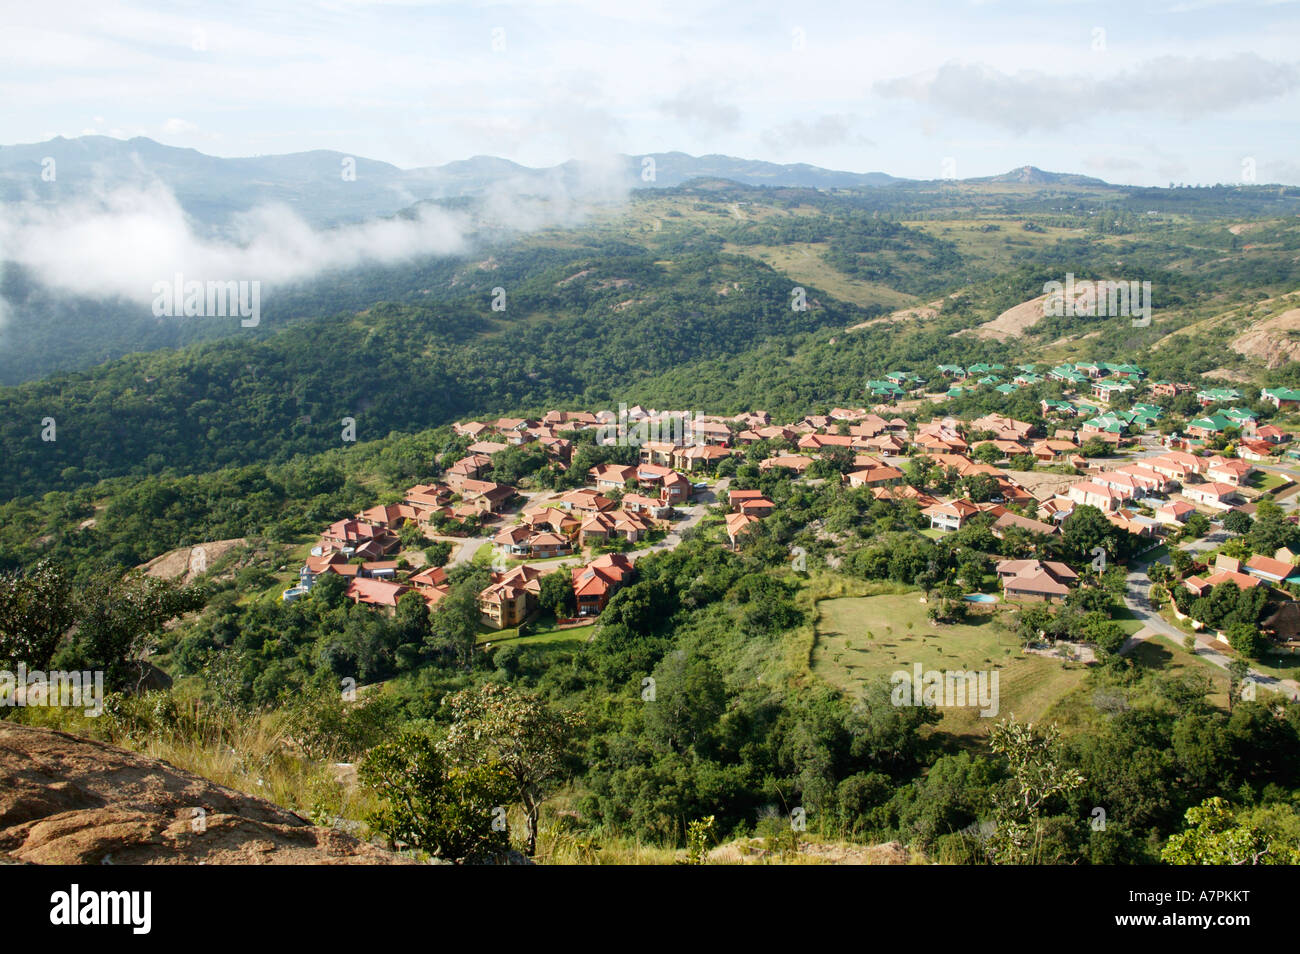 A scenic view over a residential suburban area situated on the outskirts of Nelspruit Mpumalanga South Africa Stock Photo